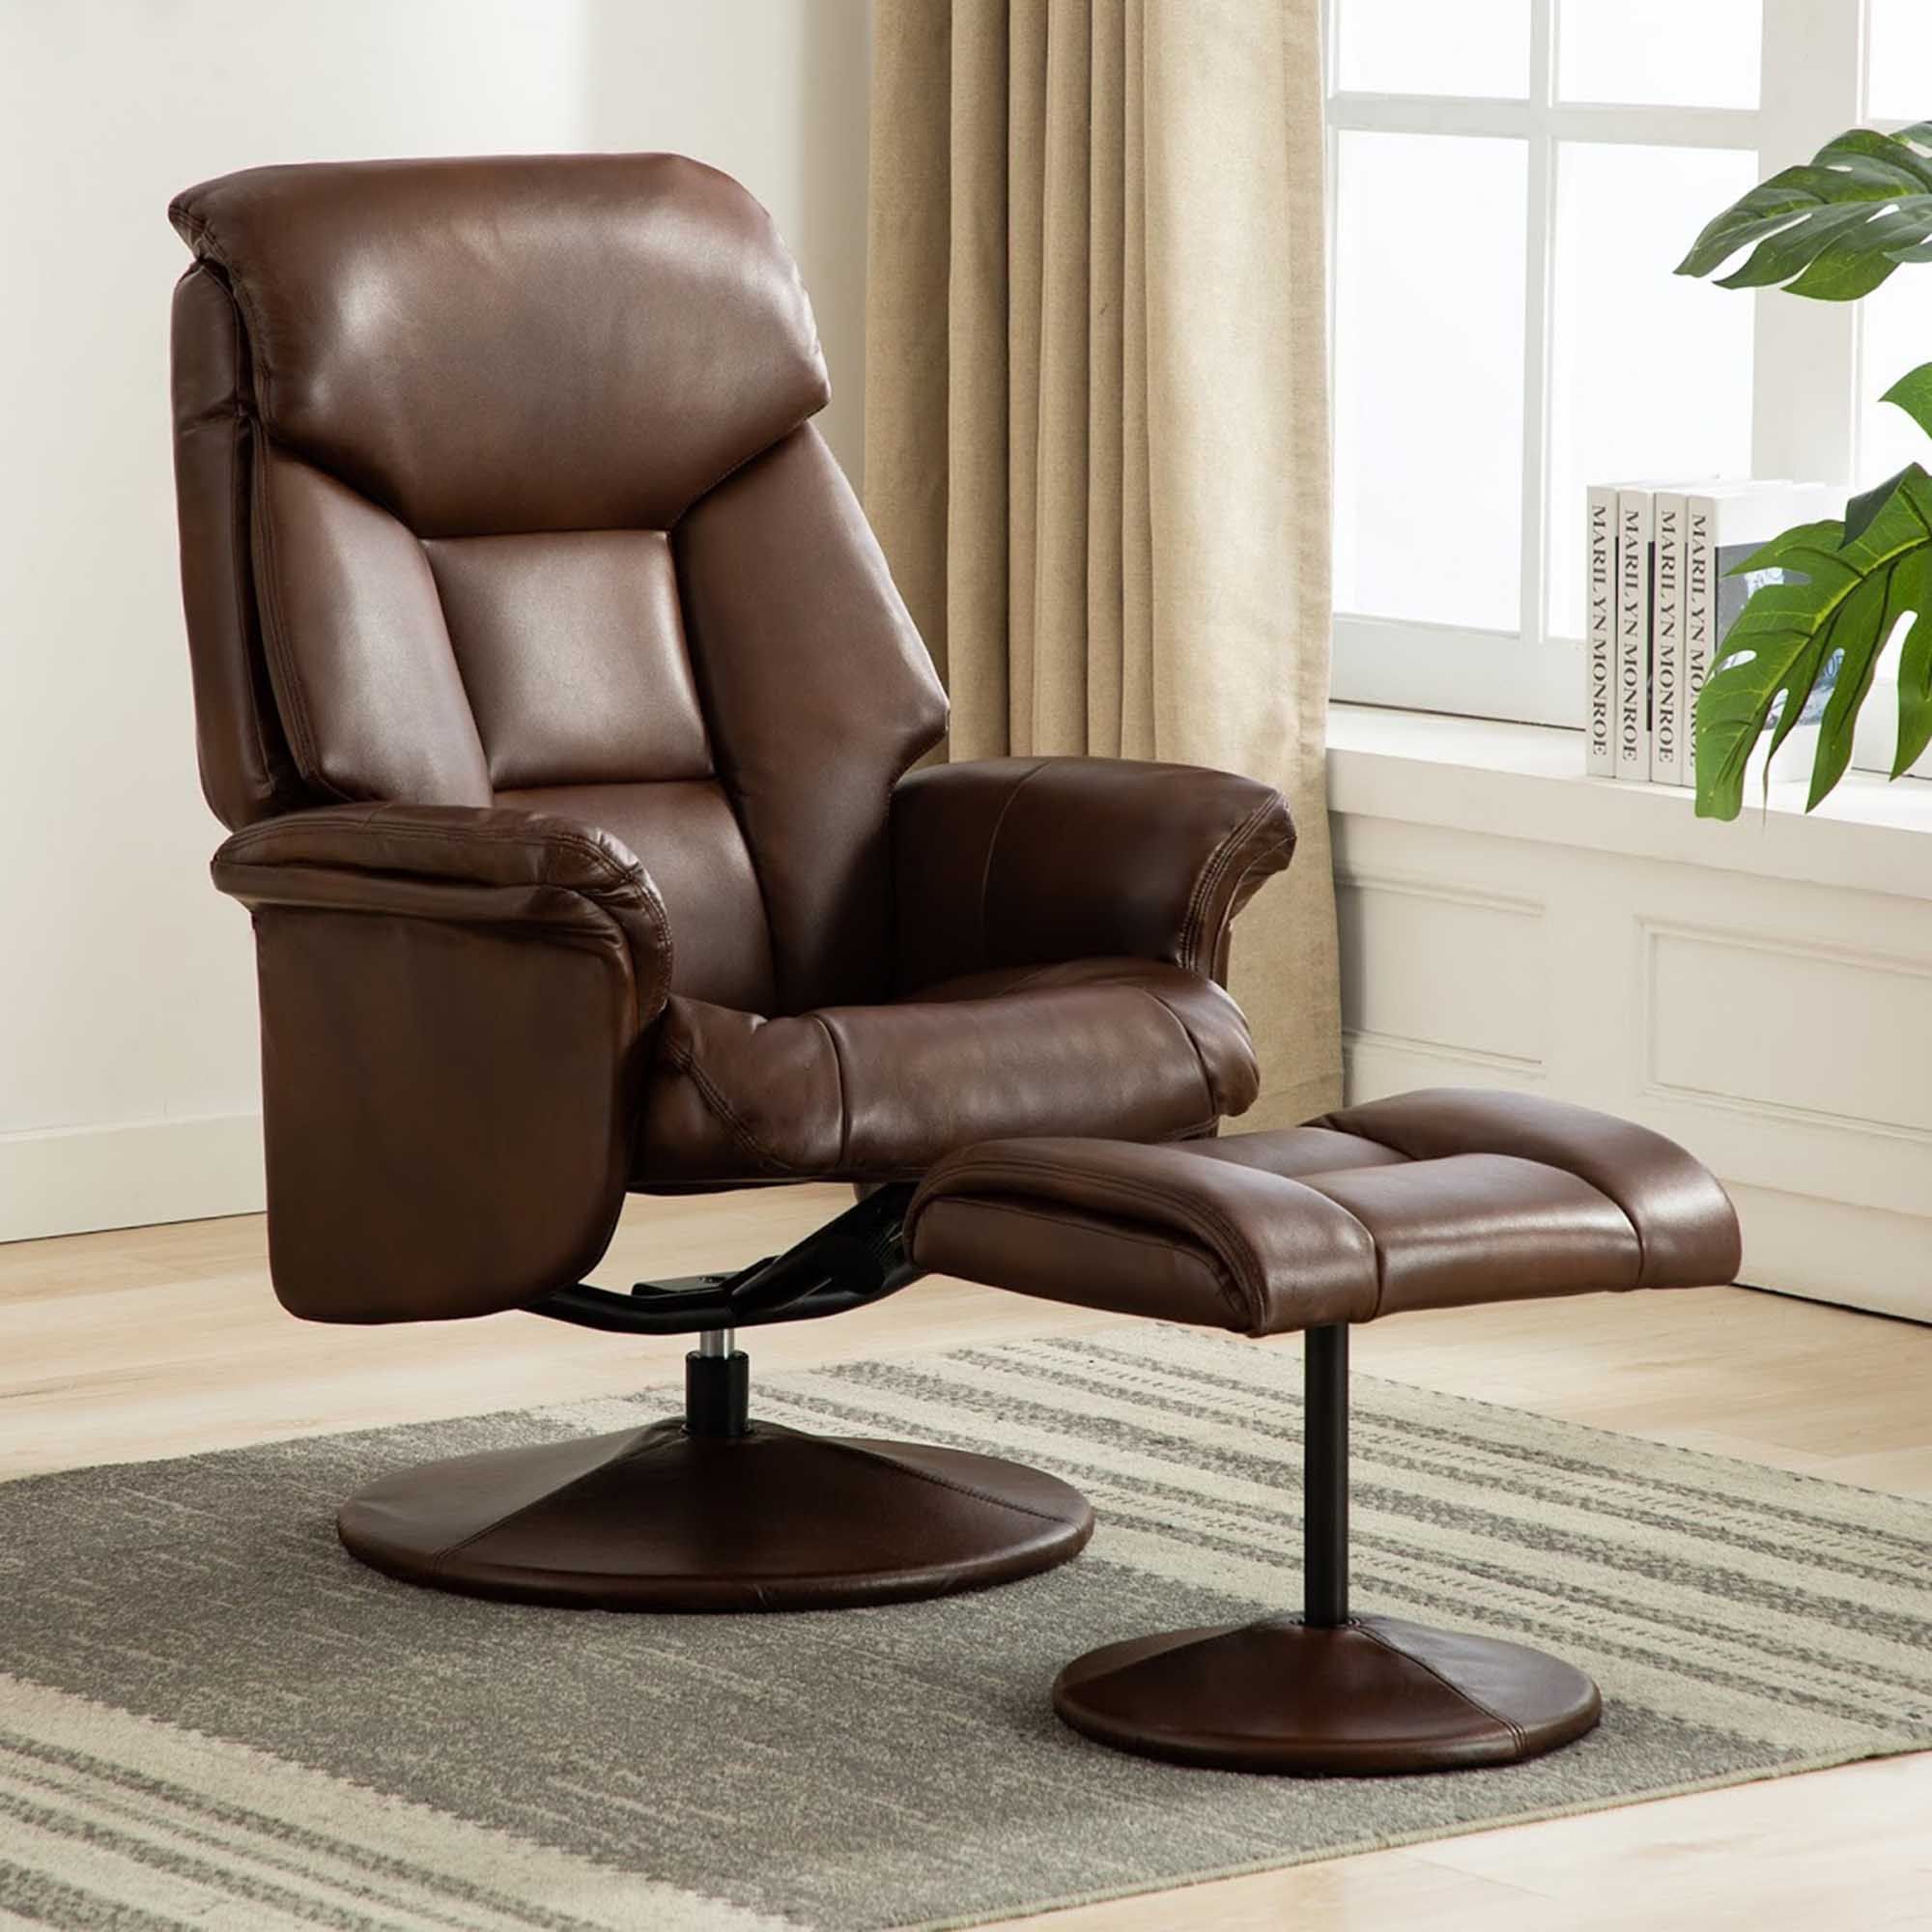 Dingle Swivel Recliner & Footstool Faux Leather Tan - Reclining Chairs ...